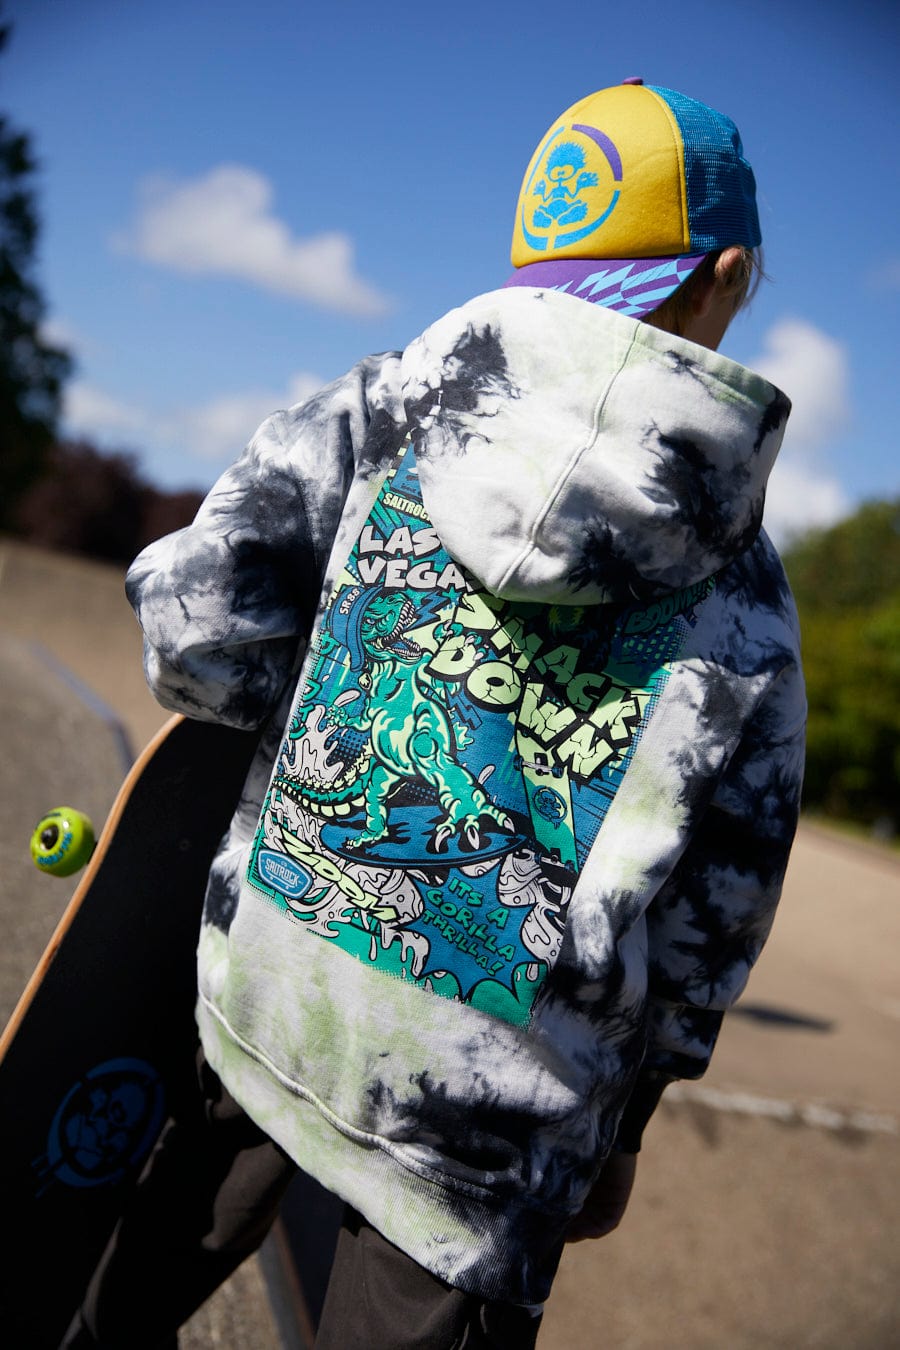 Person wearing a multi-colored Saltrock cap and a Saltrock Las Vegas Smackdown - Kids Glow in the Dark Oversized Pop Hoodie - Multi with a comic-style graphic on the back, holding a skateboard, standing outdoors.